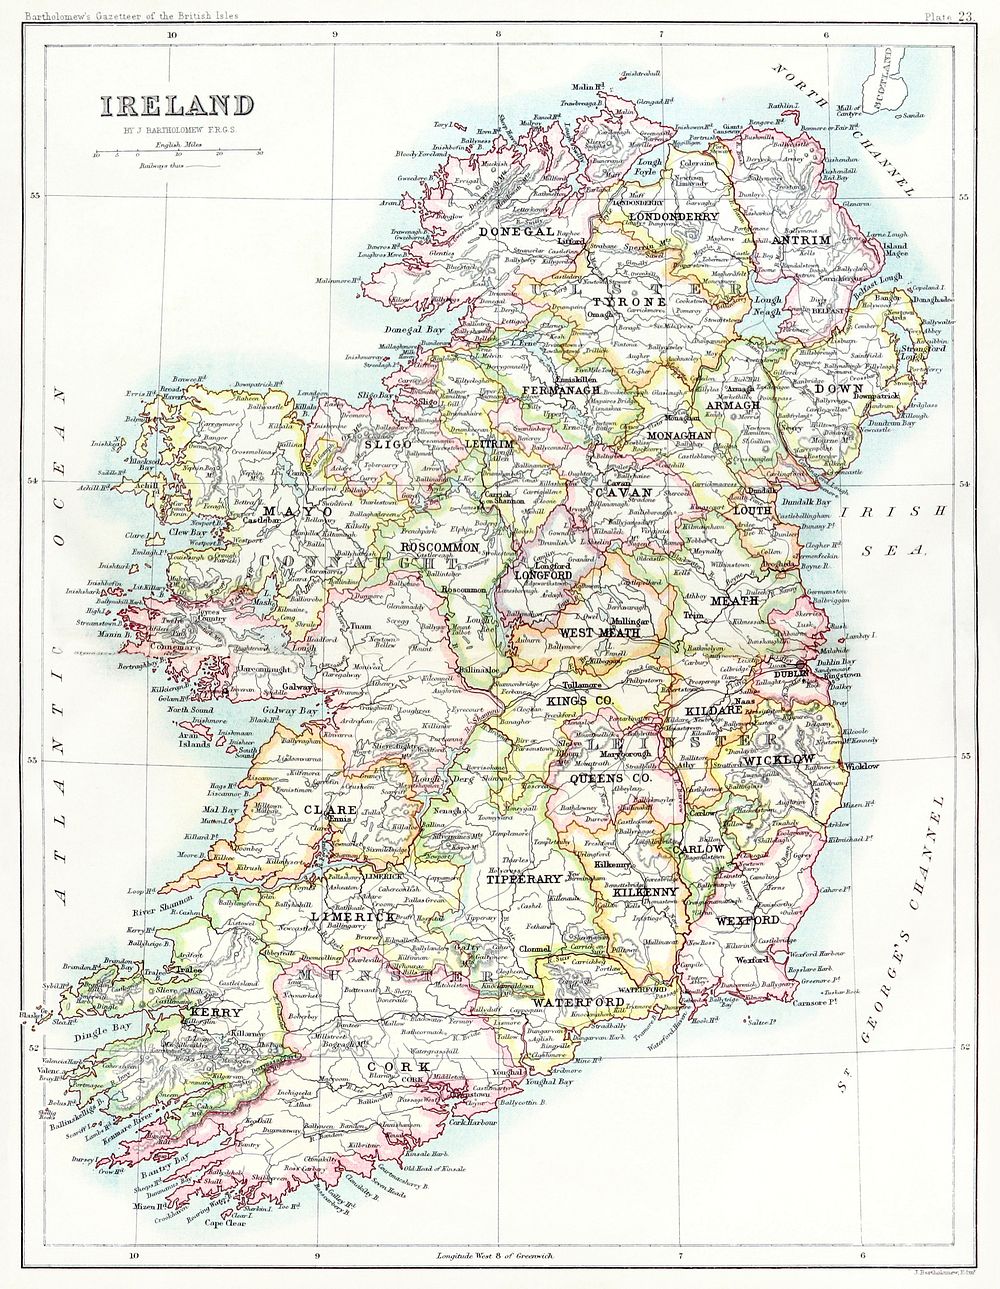 Gazetteer of the British Isles, statistical and topographical by John Bartholomew (1887). Original from British Library.…